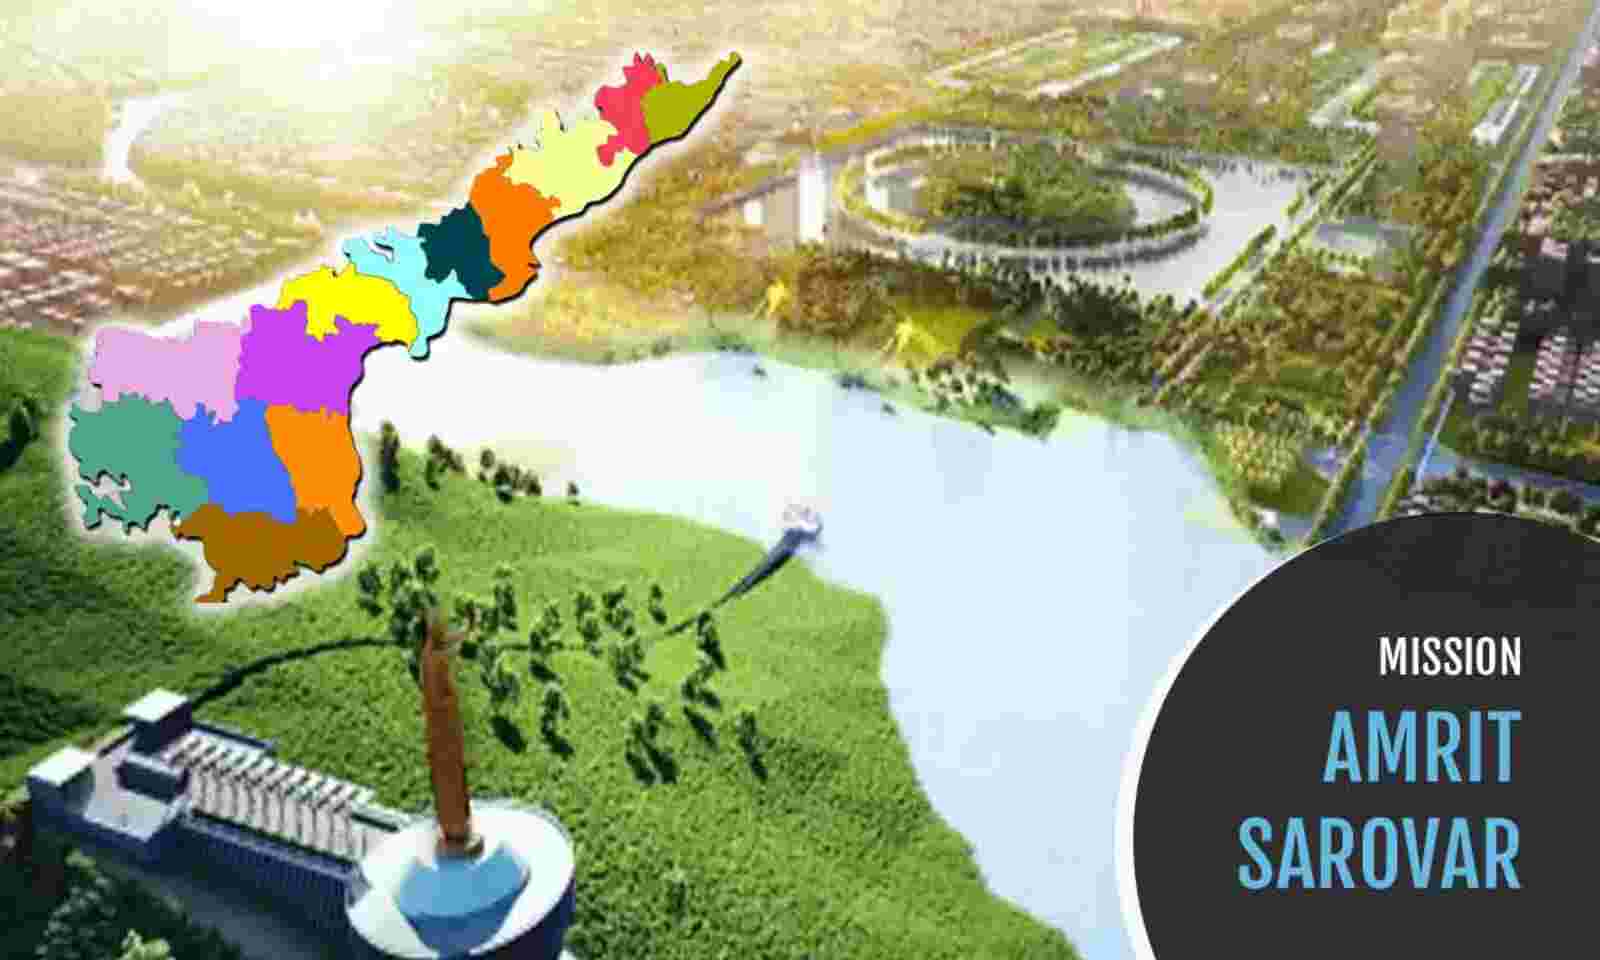 andhra pradesh stands third position in implementing amrit sarovar mission